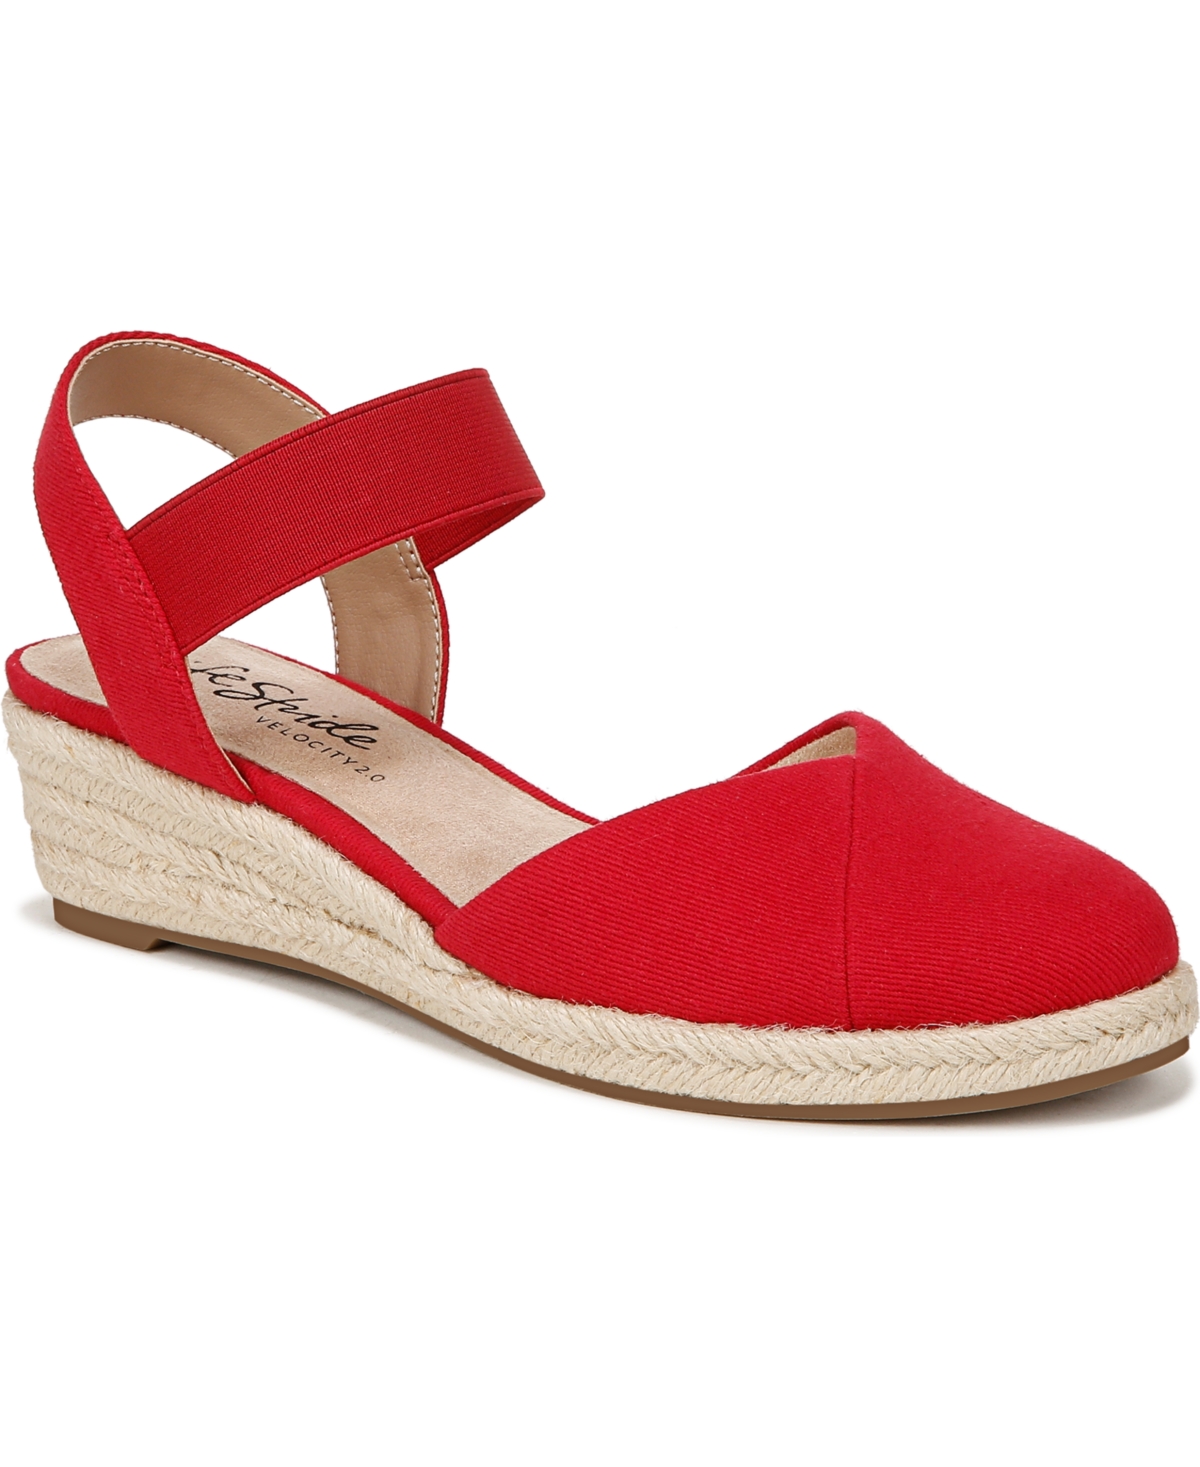 Lifestride Kimmie Espadrilles In Fire Red Canvas